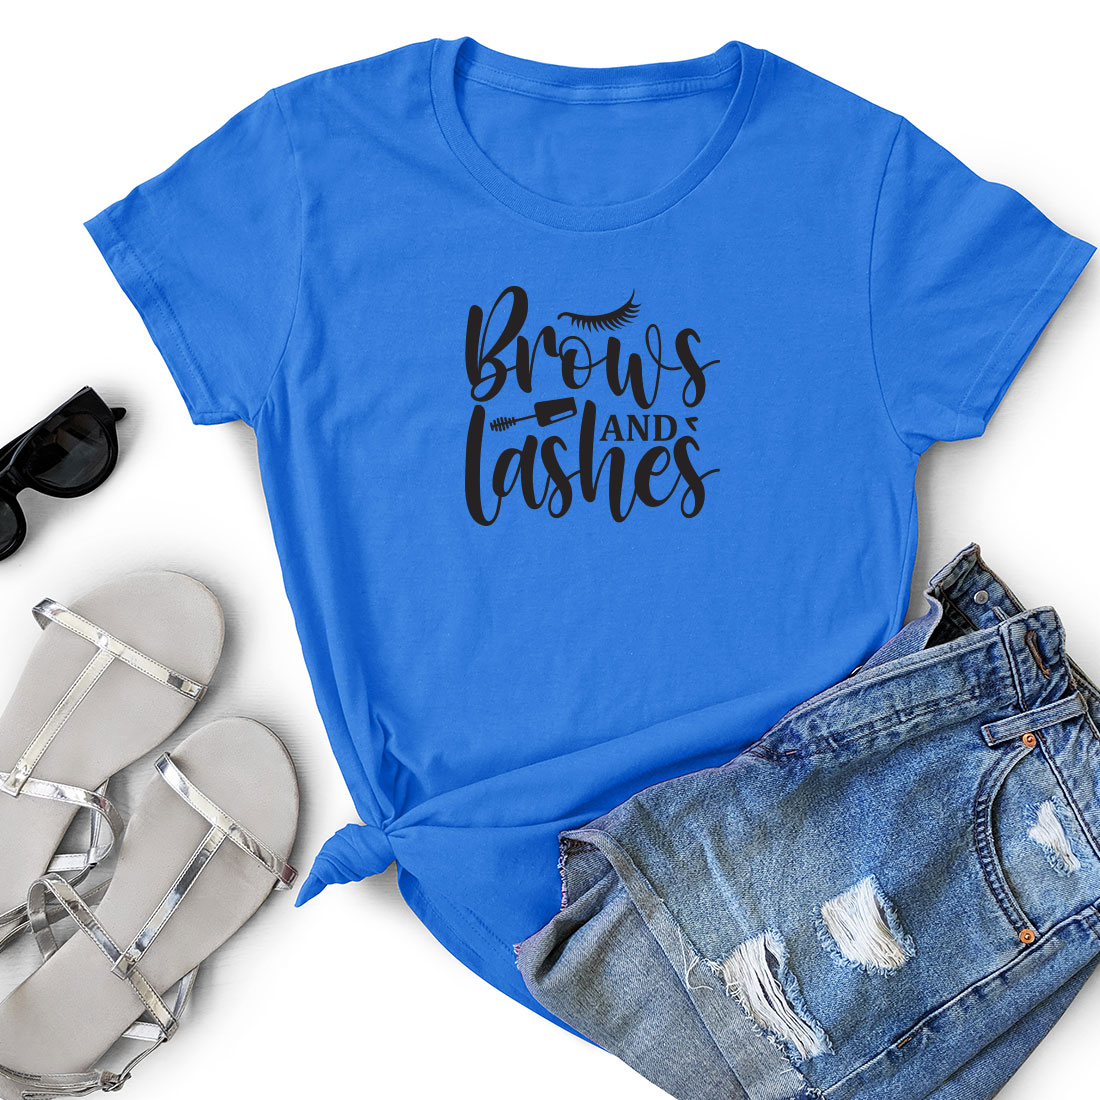 Blue t - shirt that says brews and lashes next to a pair of.